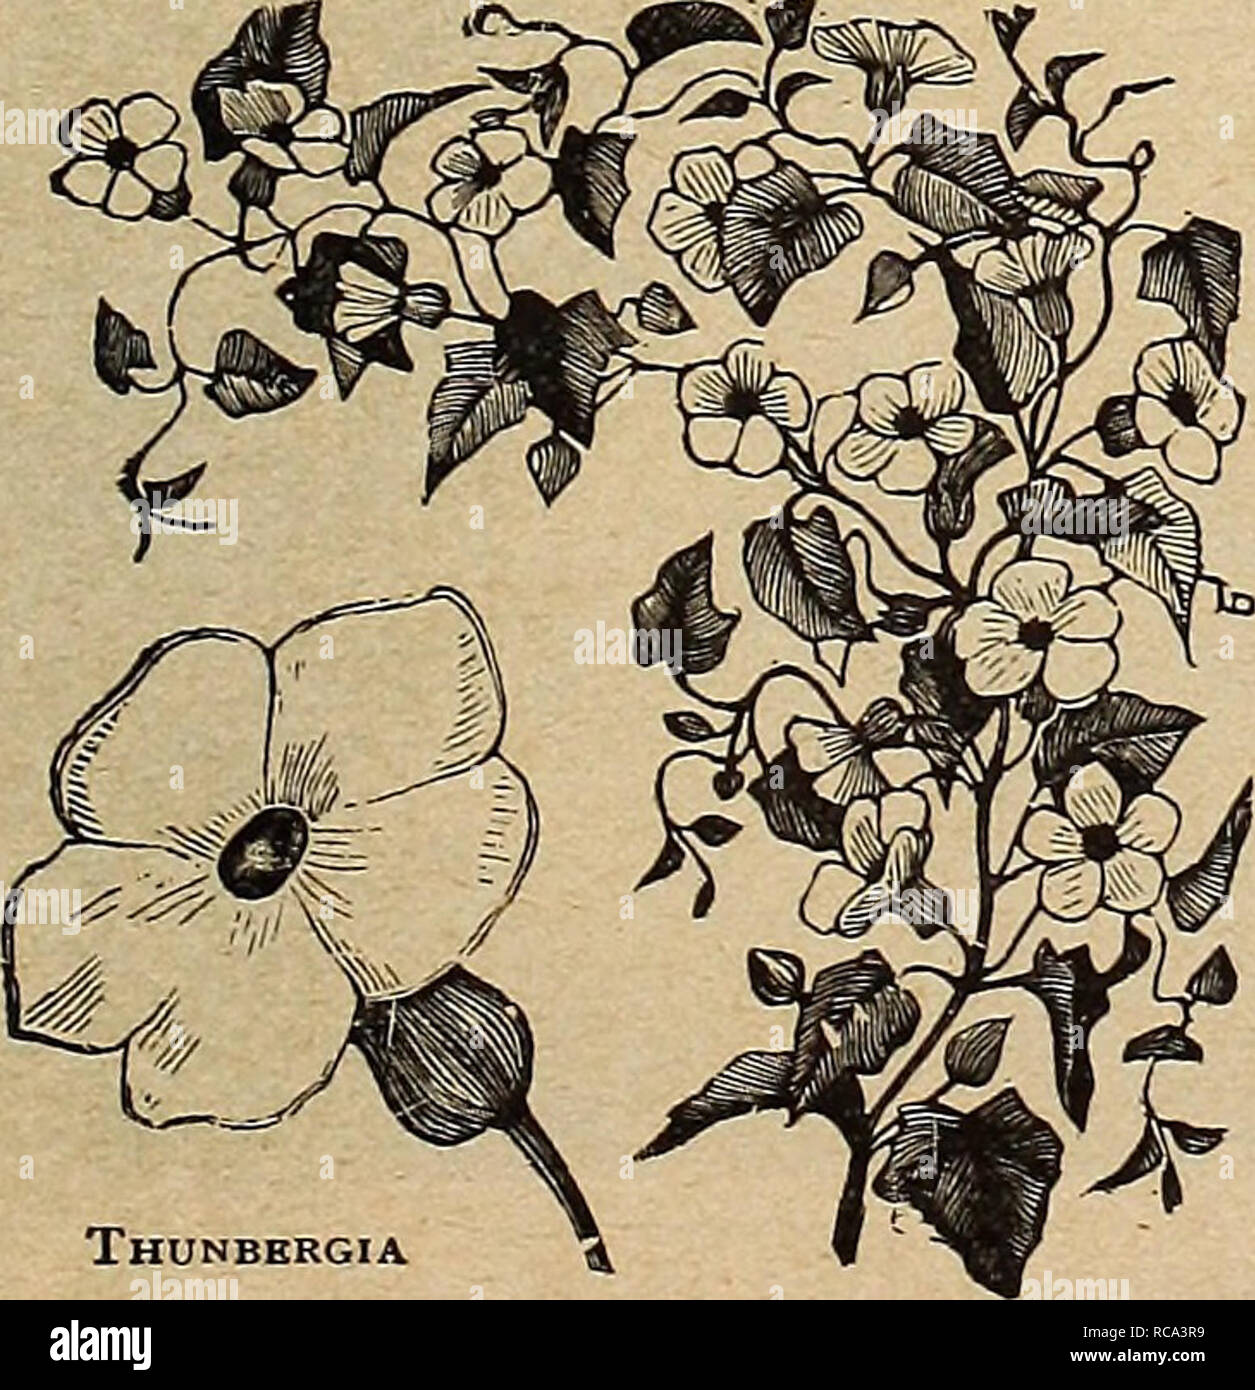 . Dreer's garden book 1919. Seeds Catalogs; Nursery stock Catalogs; Gardening Equipment and supplies Catalogs; Flowers Seeds Catalogs; Vegetables Seeds Catalogs; Fruit Seeds Catalogs. Tagetes Signata Pumila Double AND Single Sweet William THUNBERGIA (Black-eyed Susan) PER PKT. 4310 Beautiful, rapid-grow- ing annual climbers, preferring a warm, sunny situation; used extensively in hanging- baskets, vases, low fences, etc., very pretty flowers in buff, white, orange, etc., with dark eyes; mixed colors; 4 feet. (See cut.) oz., 25 cts 5. Thunbergia TORENIA 4322 Fournieri. A very fine annual; a sp Stock Photo